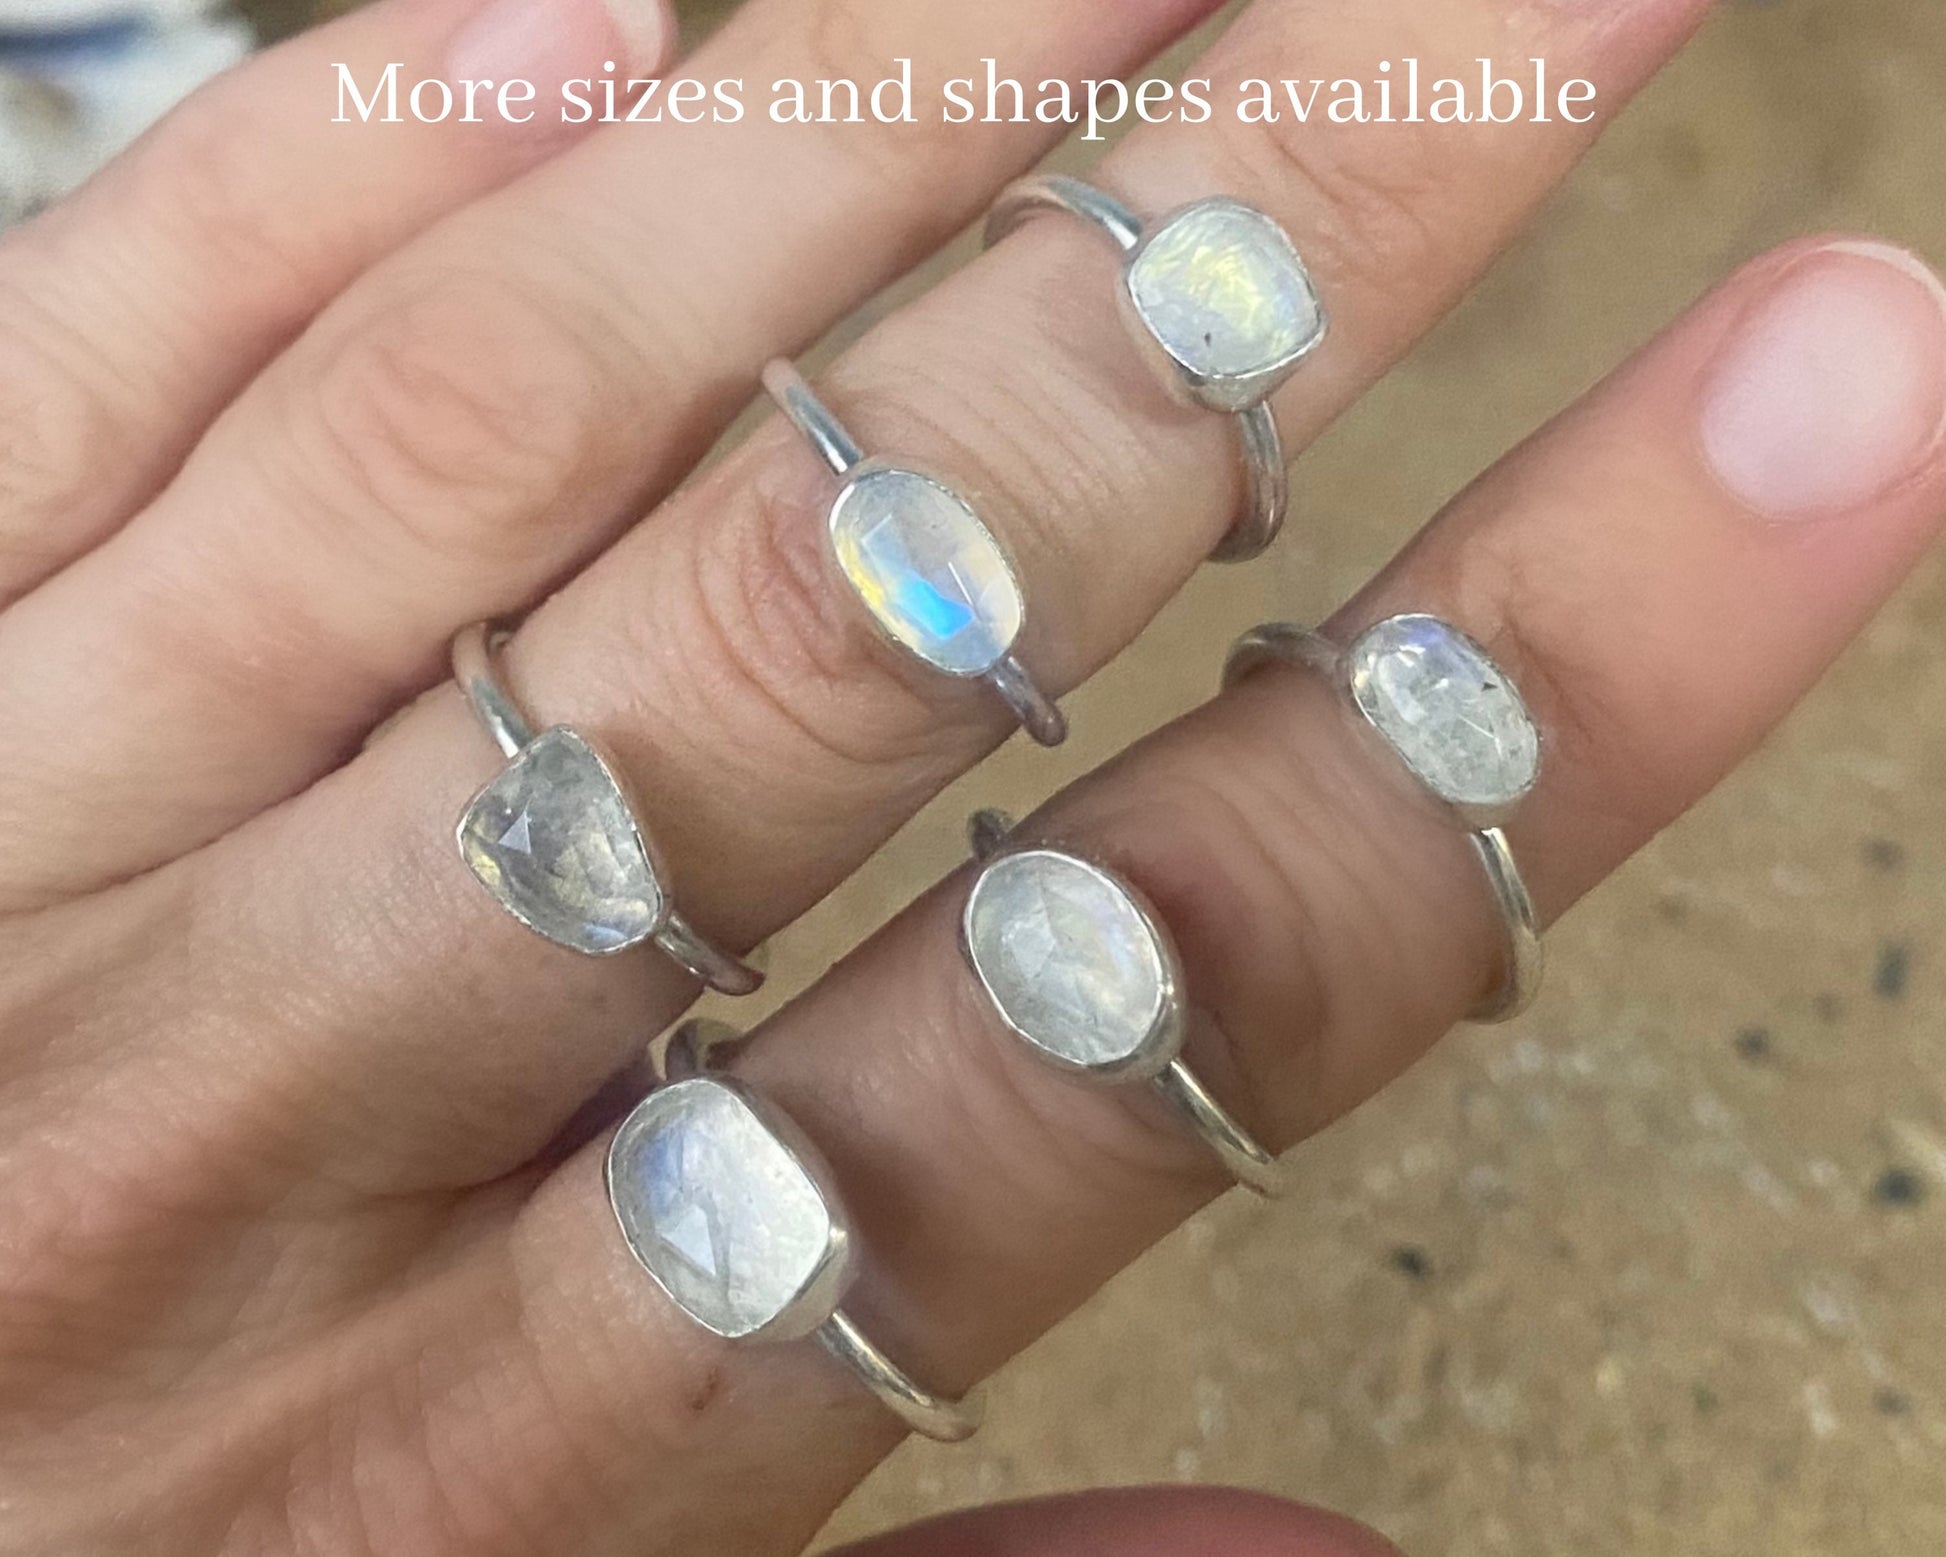 UK Size L Genuine Freeform Moonstone Stacking Ring, One of a Kind Handmade 925 Sterling Silver Ring, Gemstone Ring, Crystal Ring